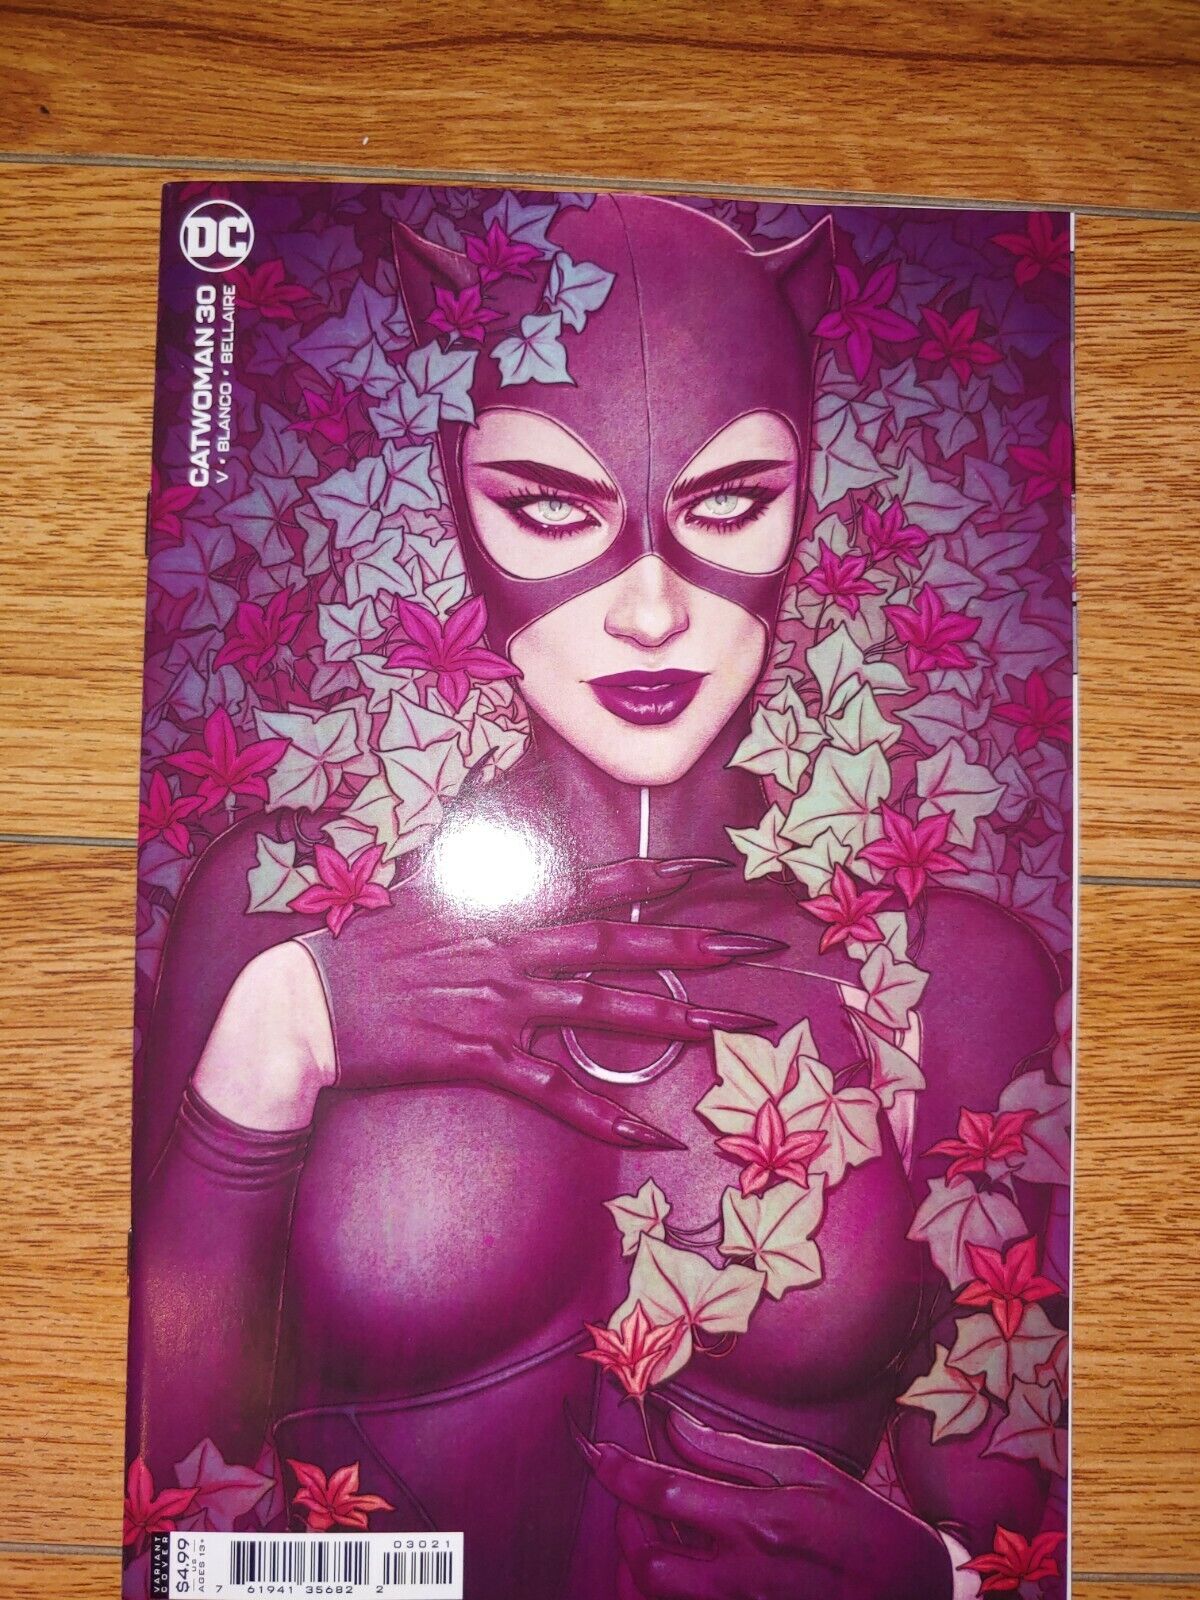 CATWOMAN #30 COVER B JENNY FRISON CARD STOCK VARIANT VF/NM 2021 DC HOHC 